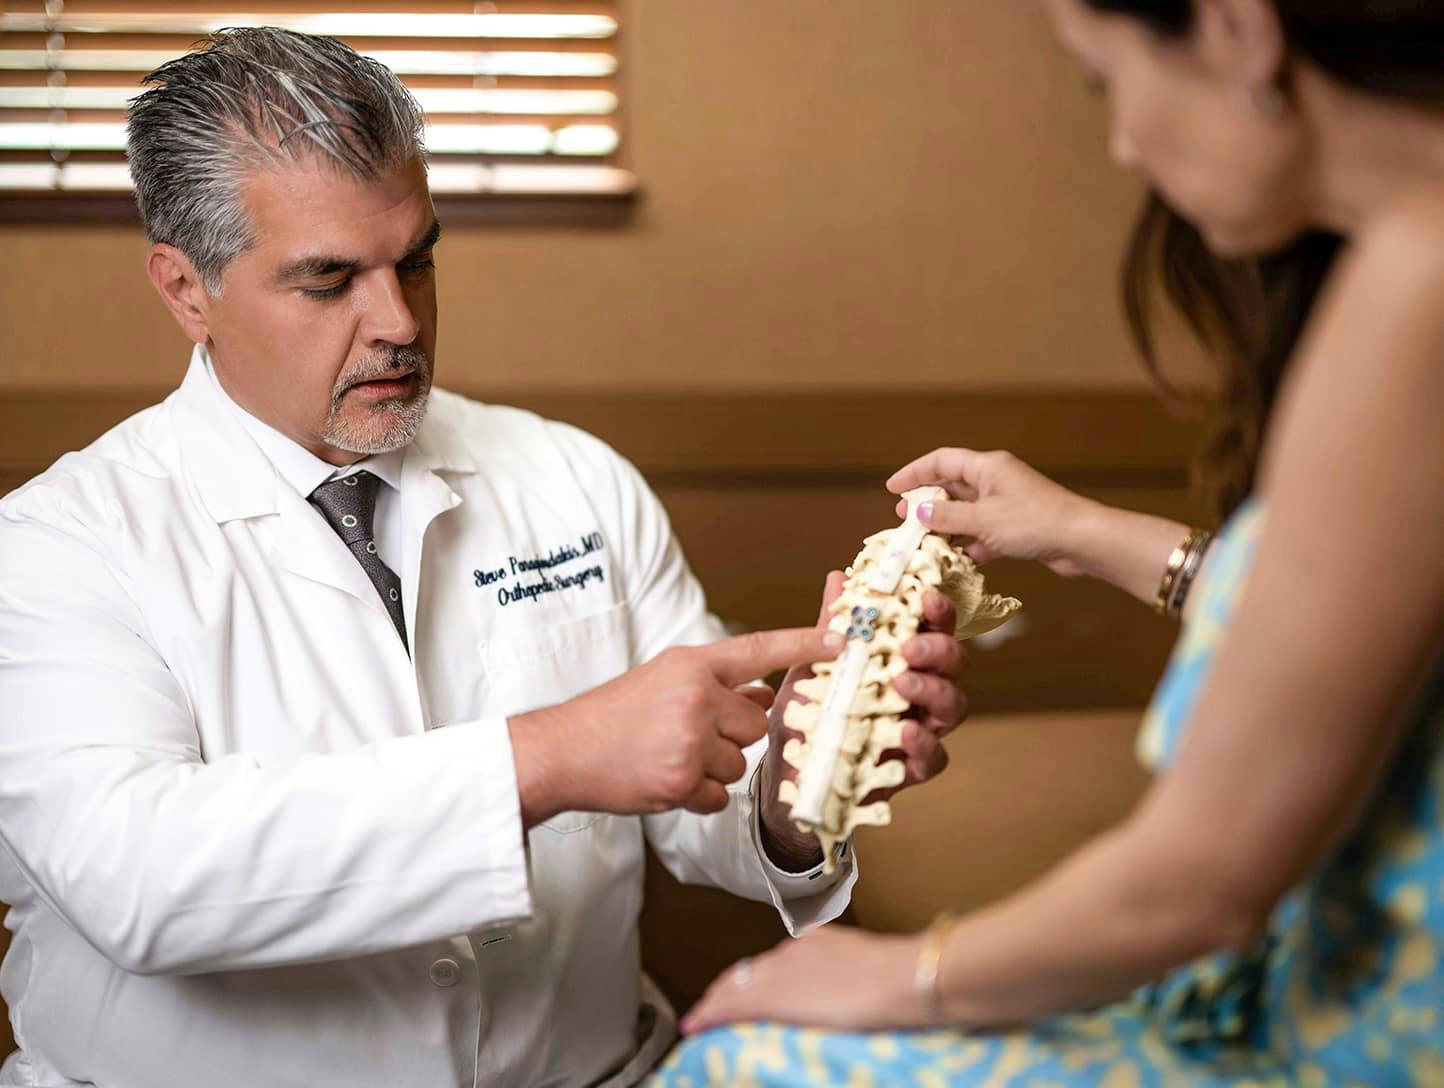 Dr. Steve Paragioudakis showing patient anatomy of the spine